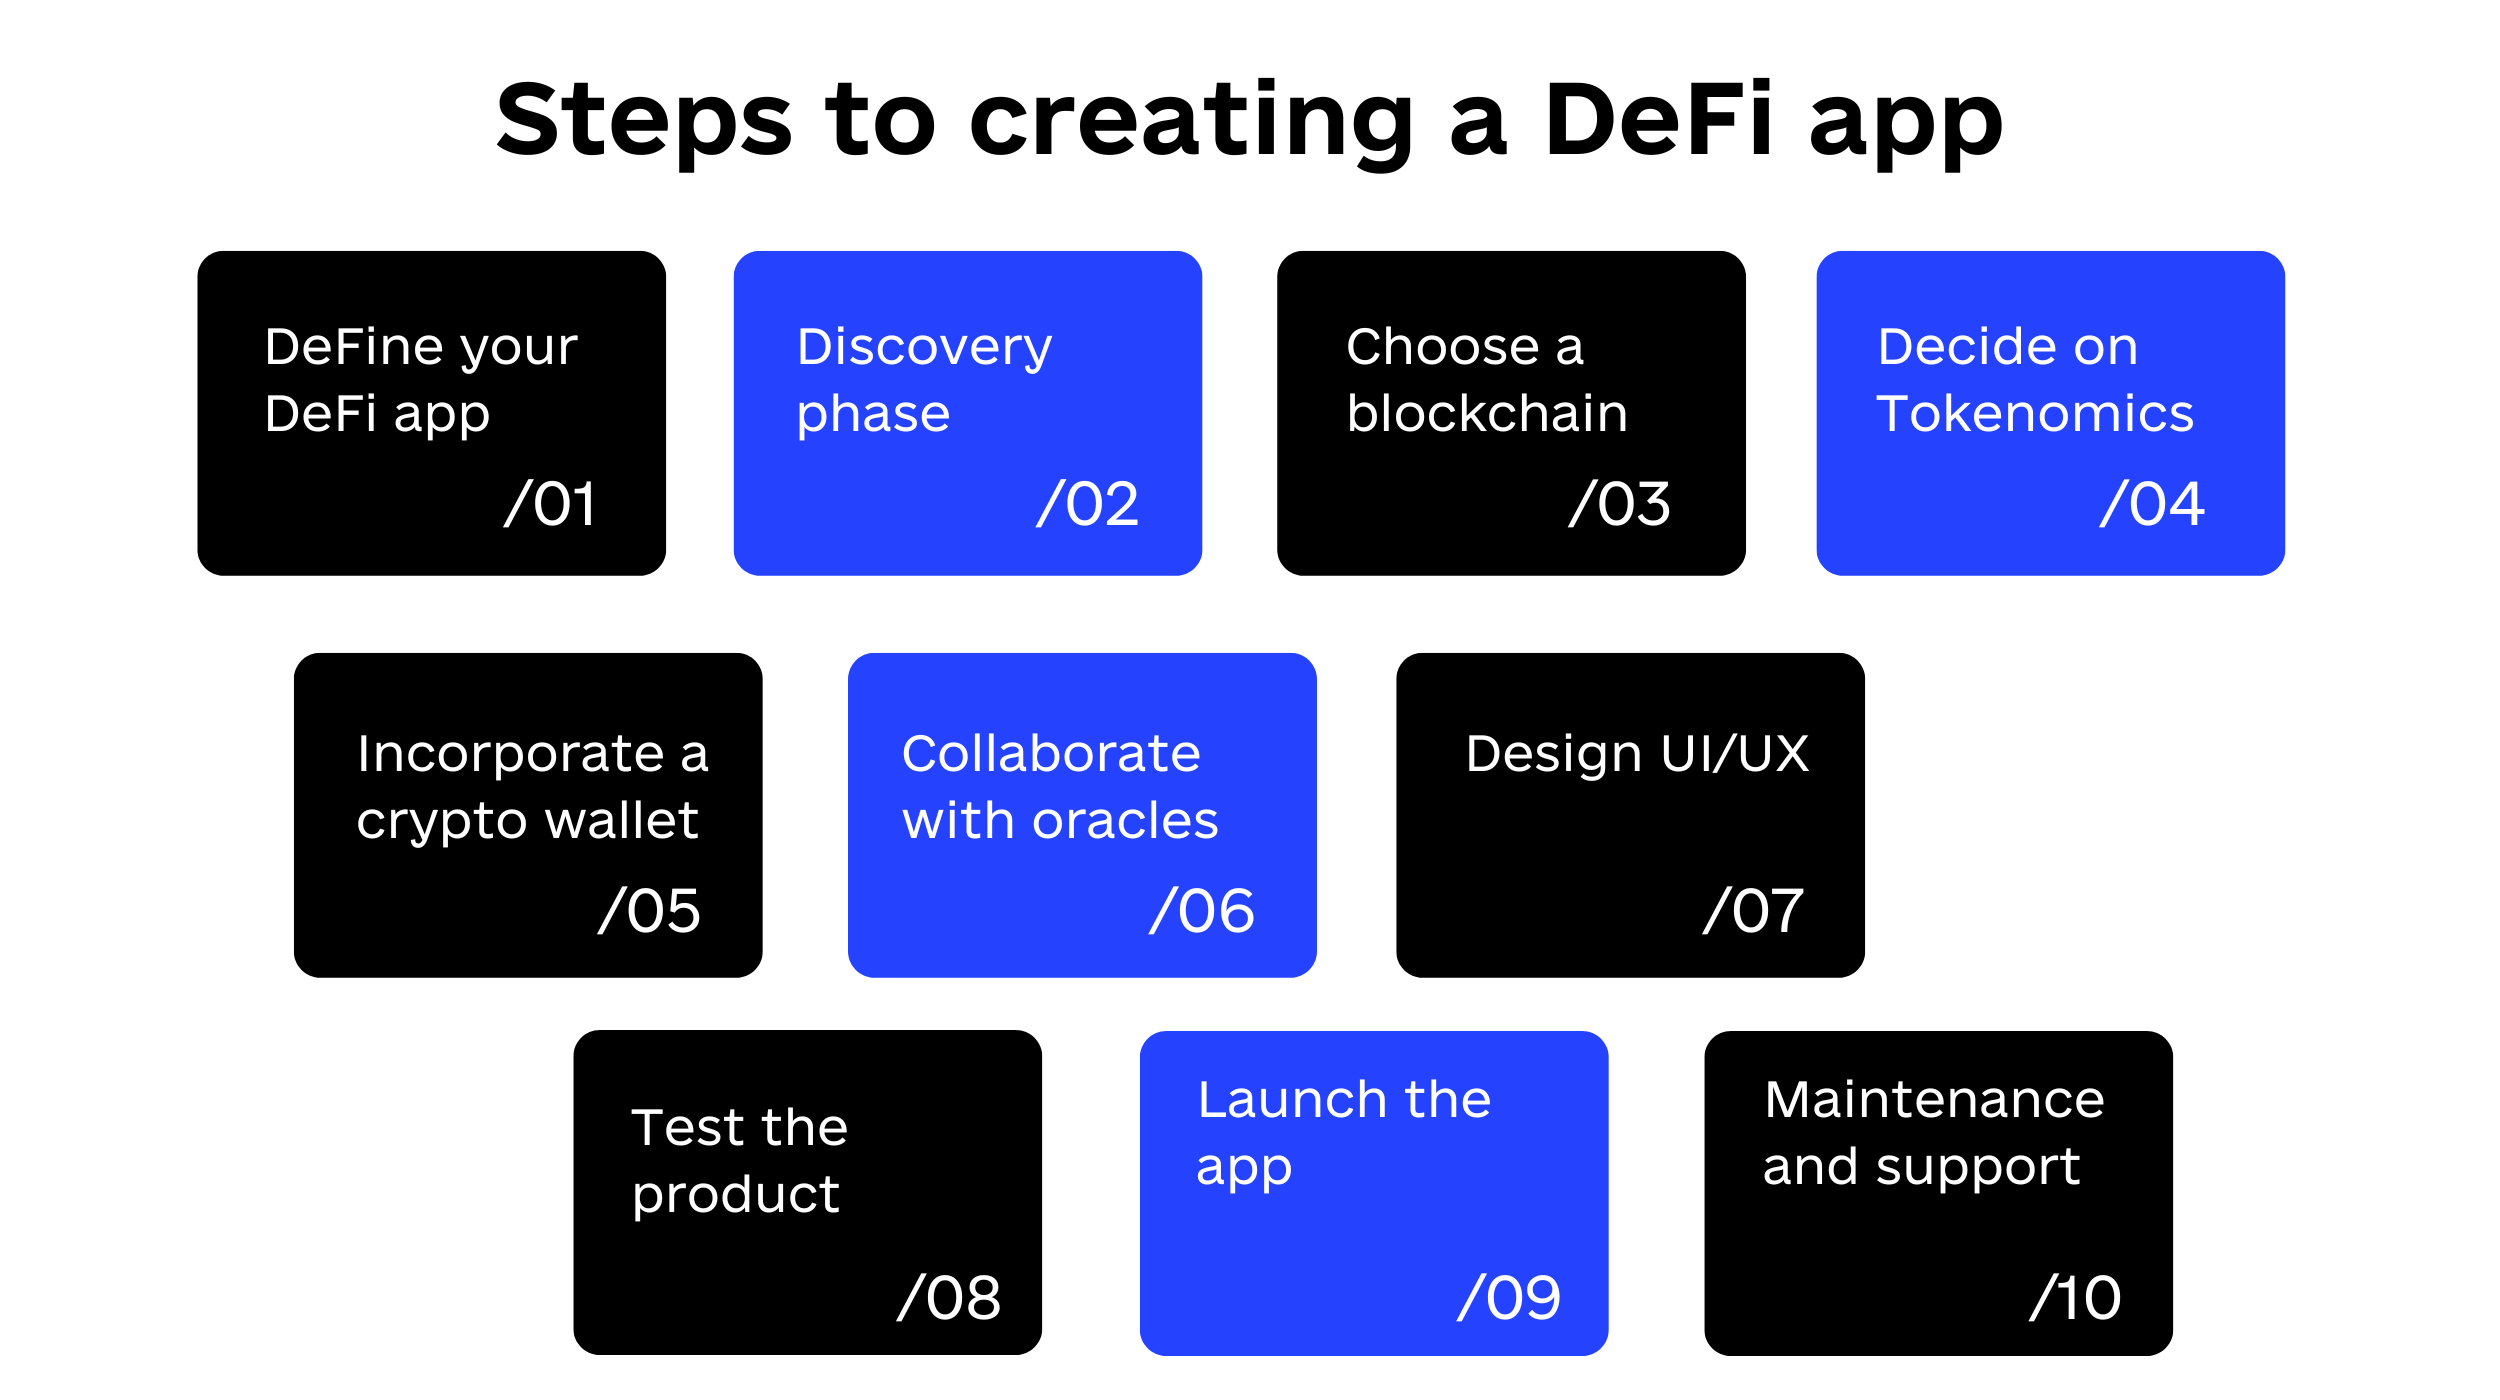 Steps to creating a DeFi app